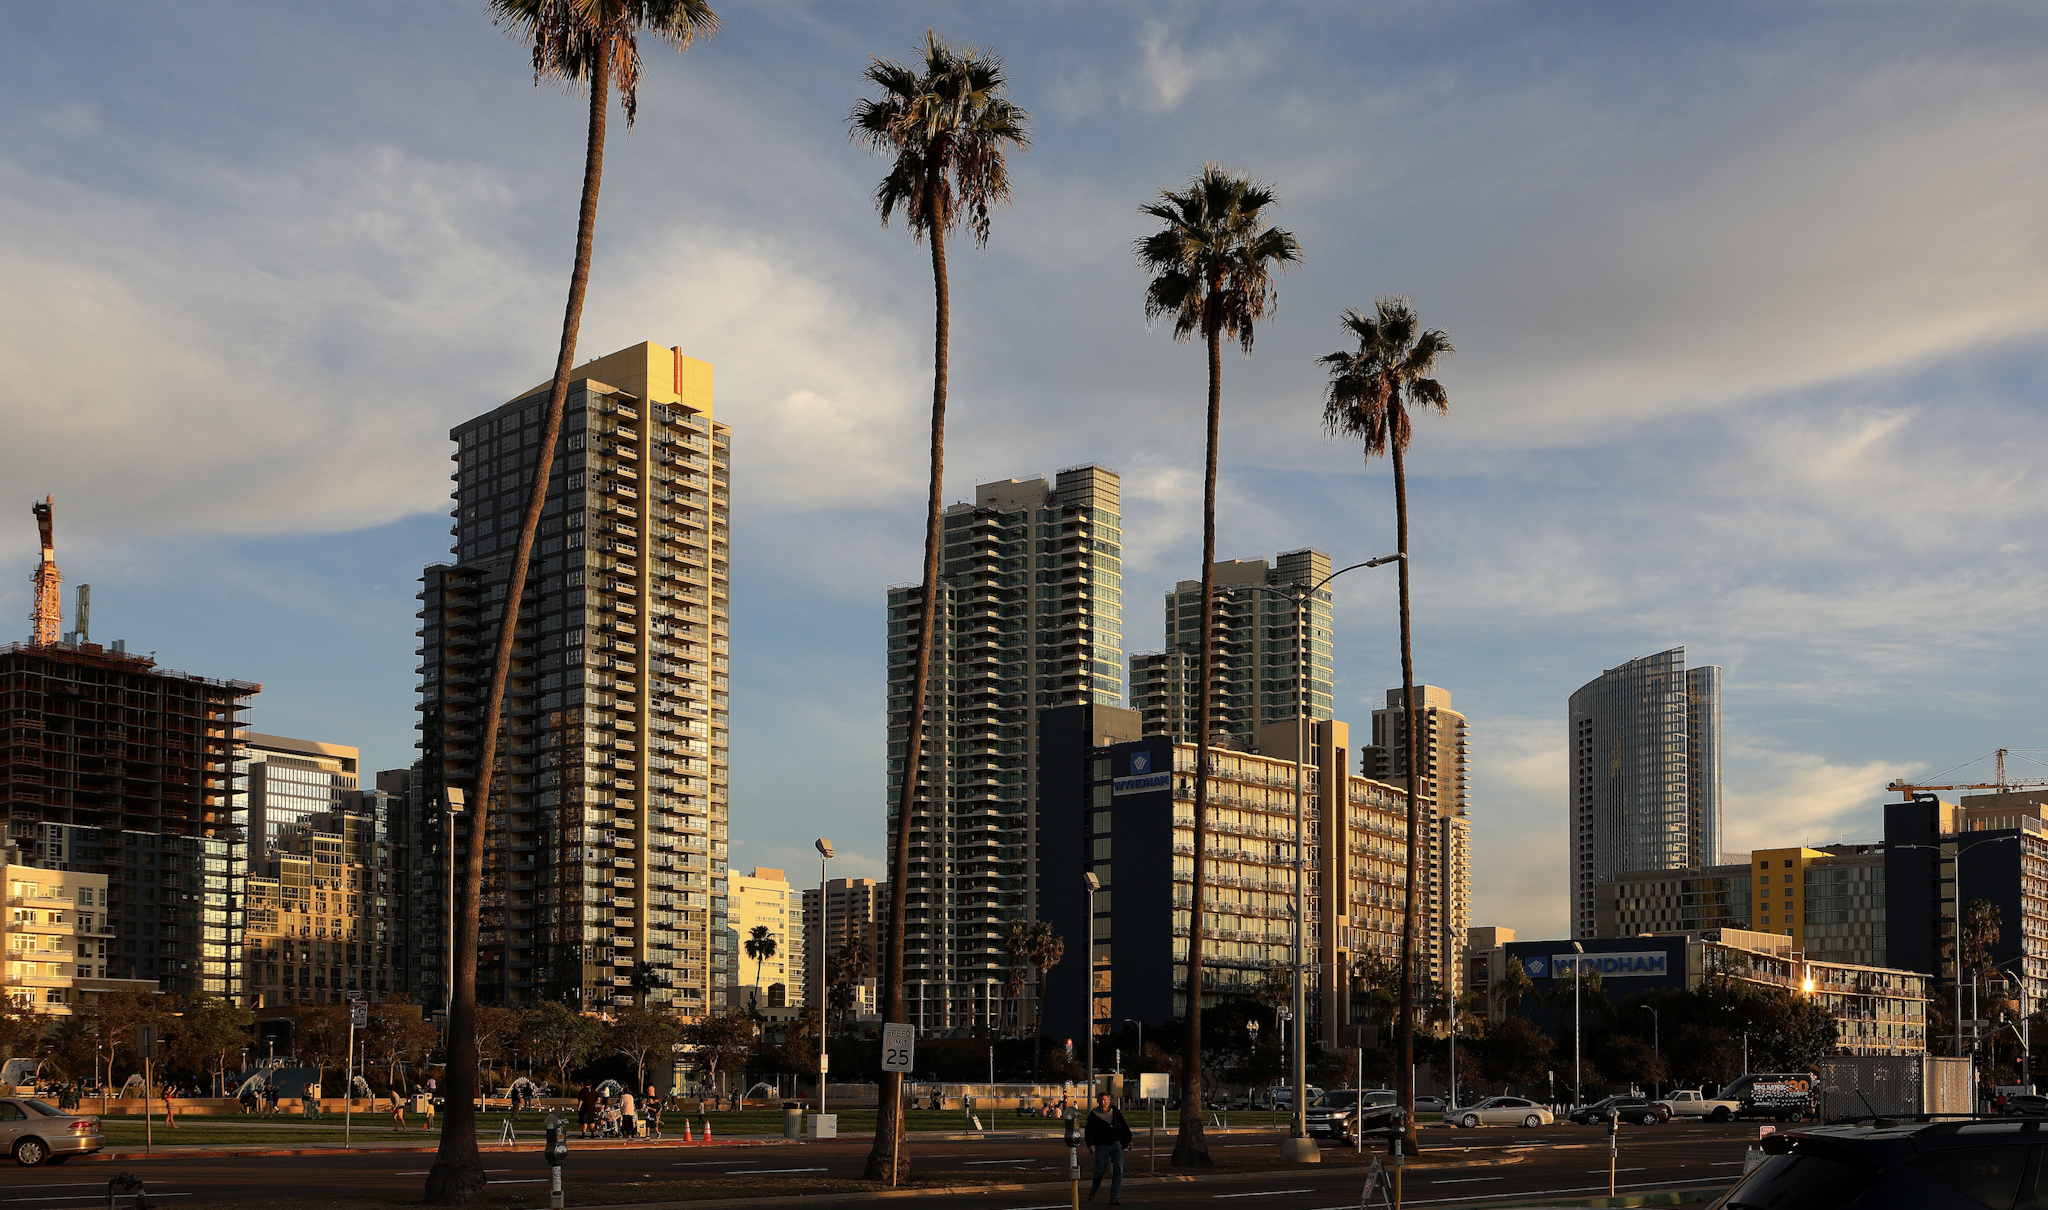 SAN DIEGO - JANUARY 14: A partial view of the San Diego skyline, as photographed along Pacific Highway in San Diego, California on January 14, 2018.